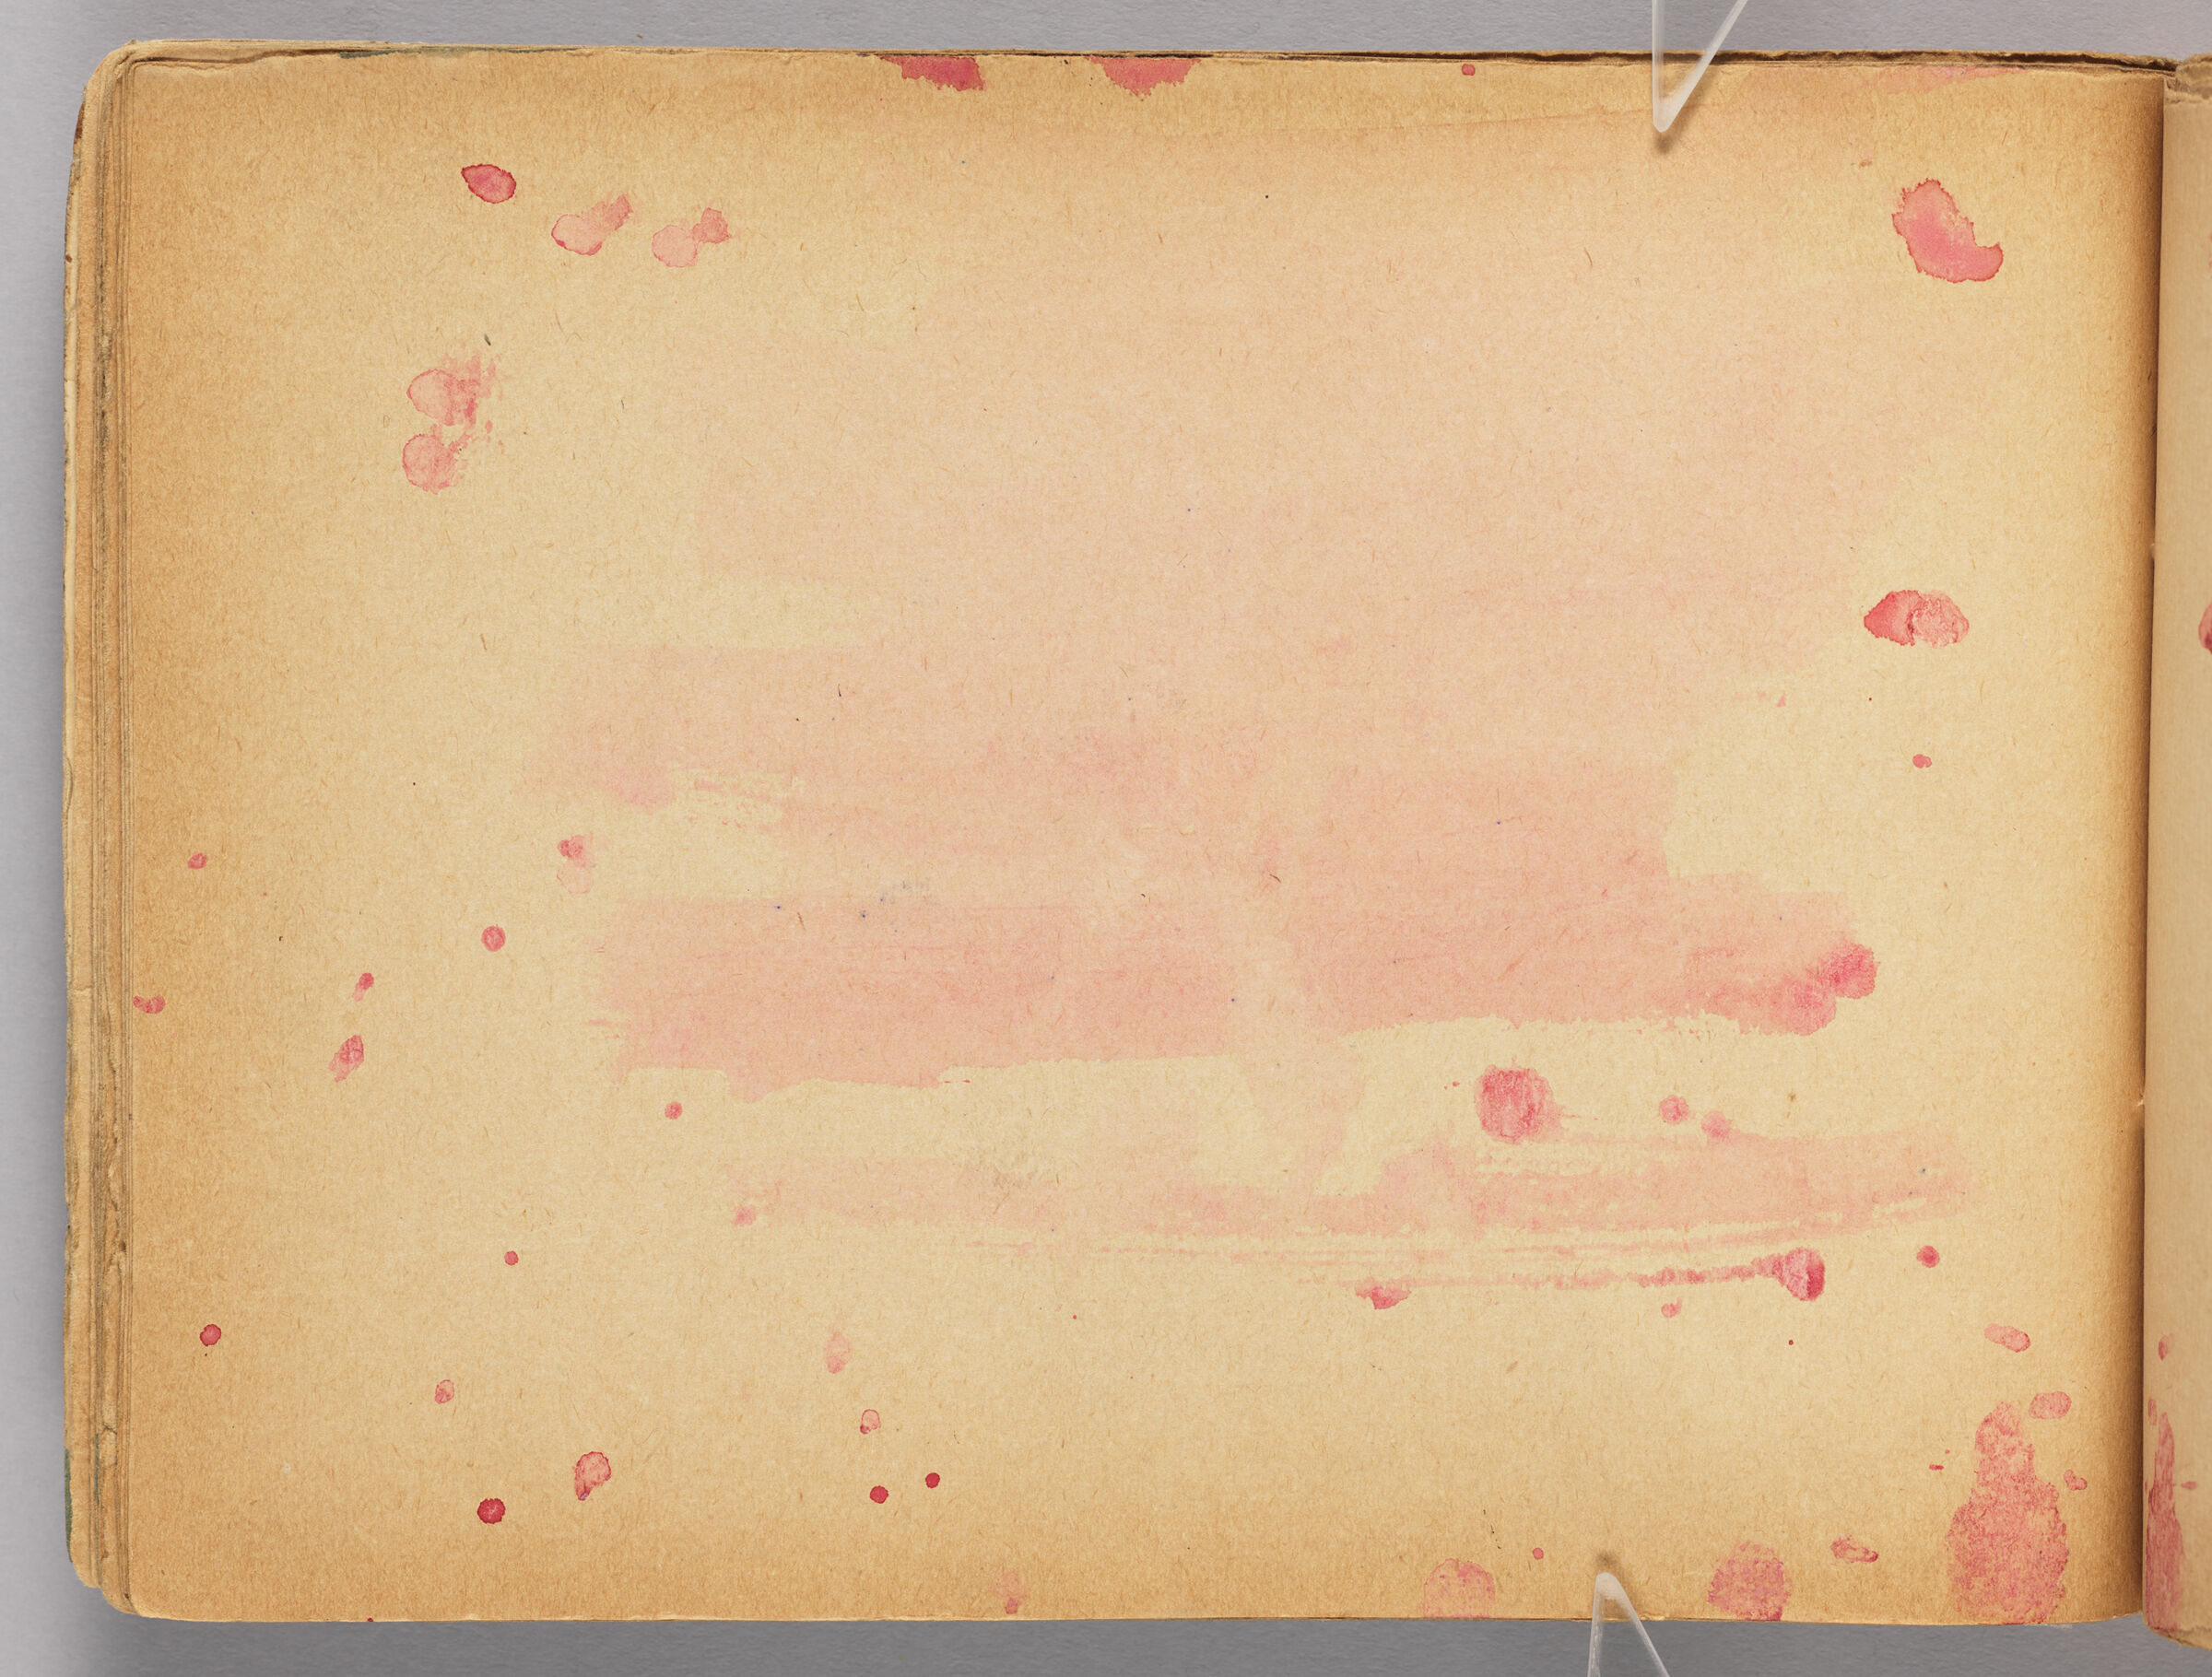 Untitled (Watercolor Marks, Left Page); Untitled (Watercolor Marks And Transfer, Right Page)